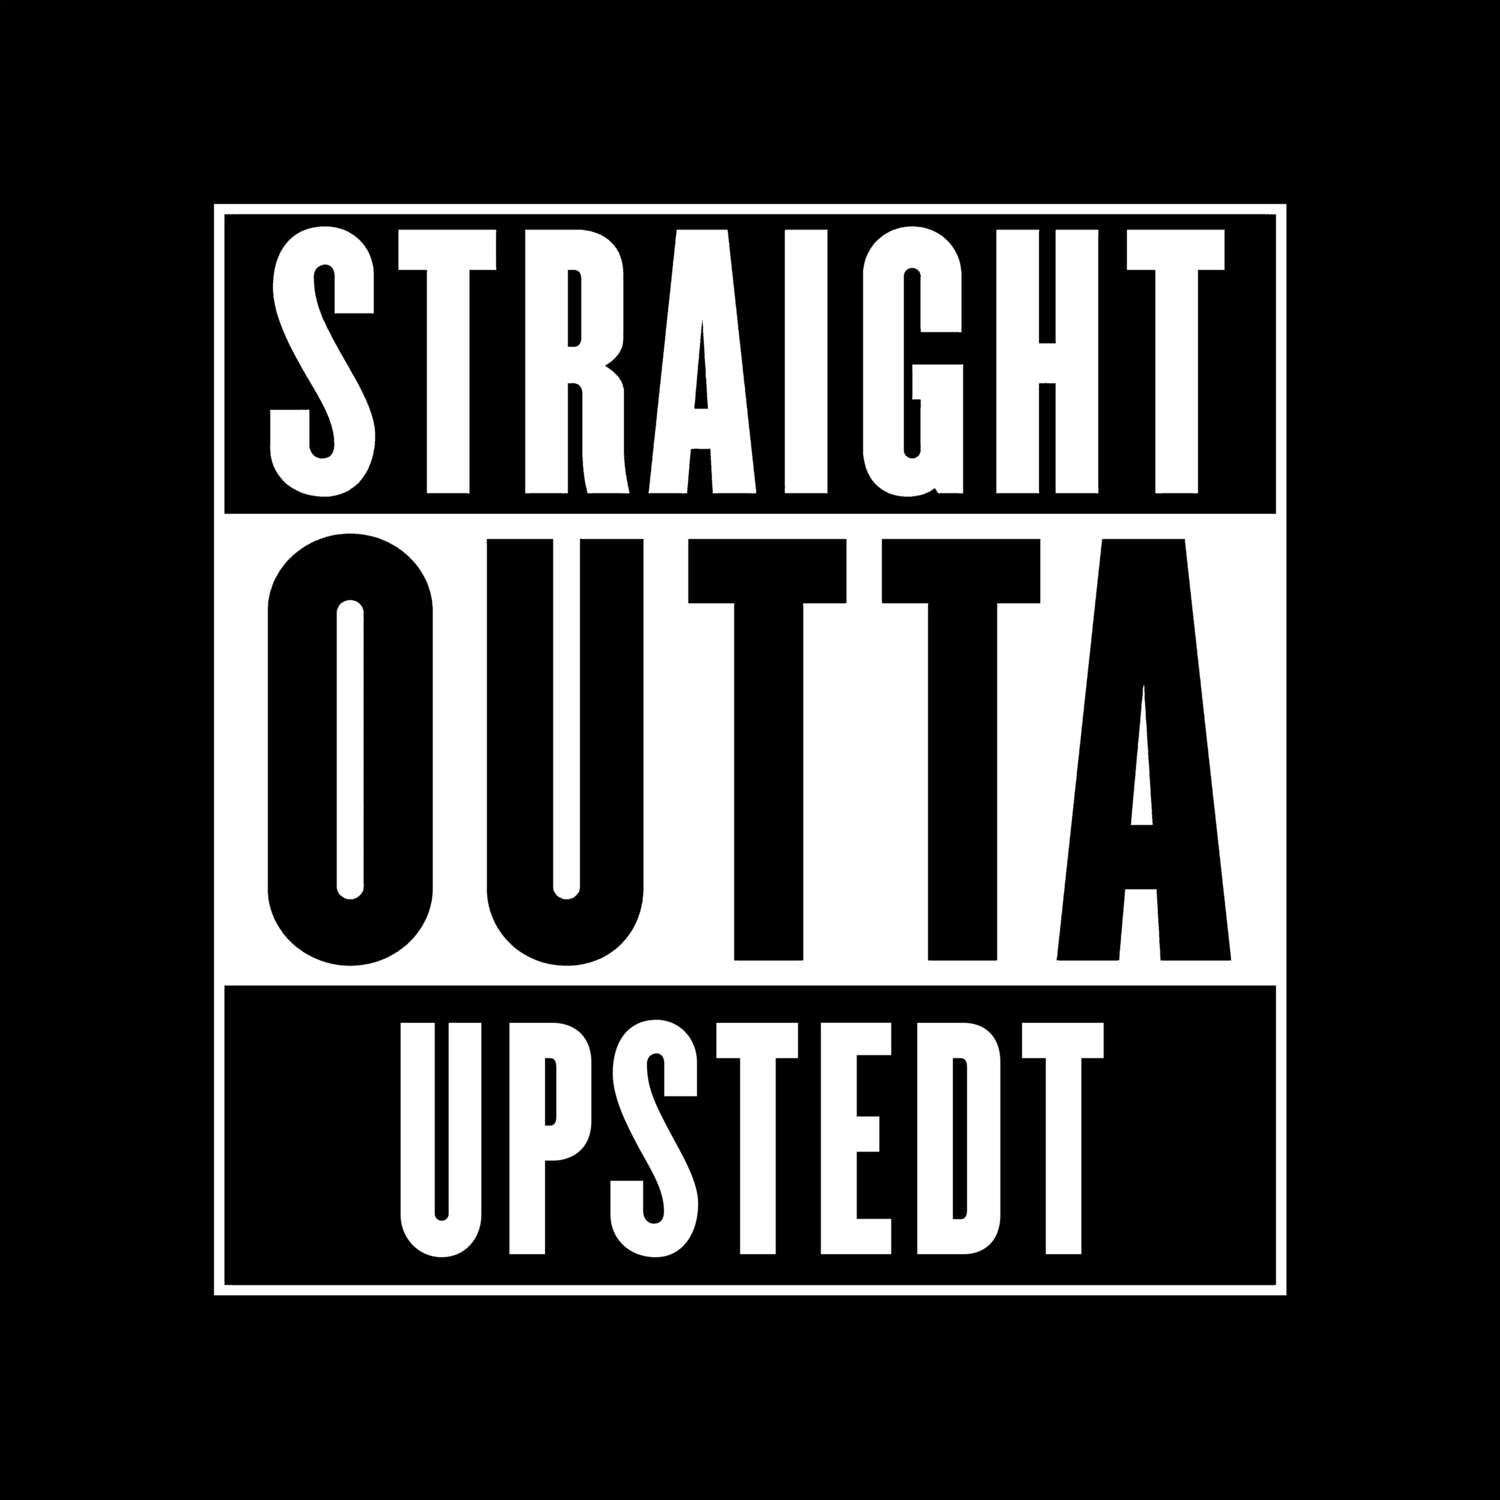 Upstedt T-Shirt »Straight Outta«